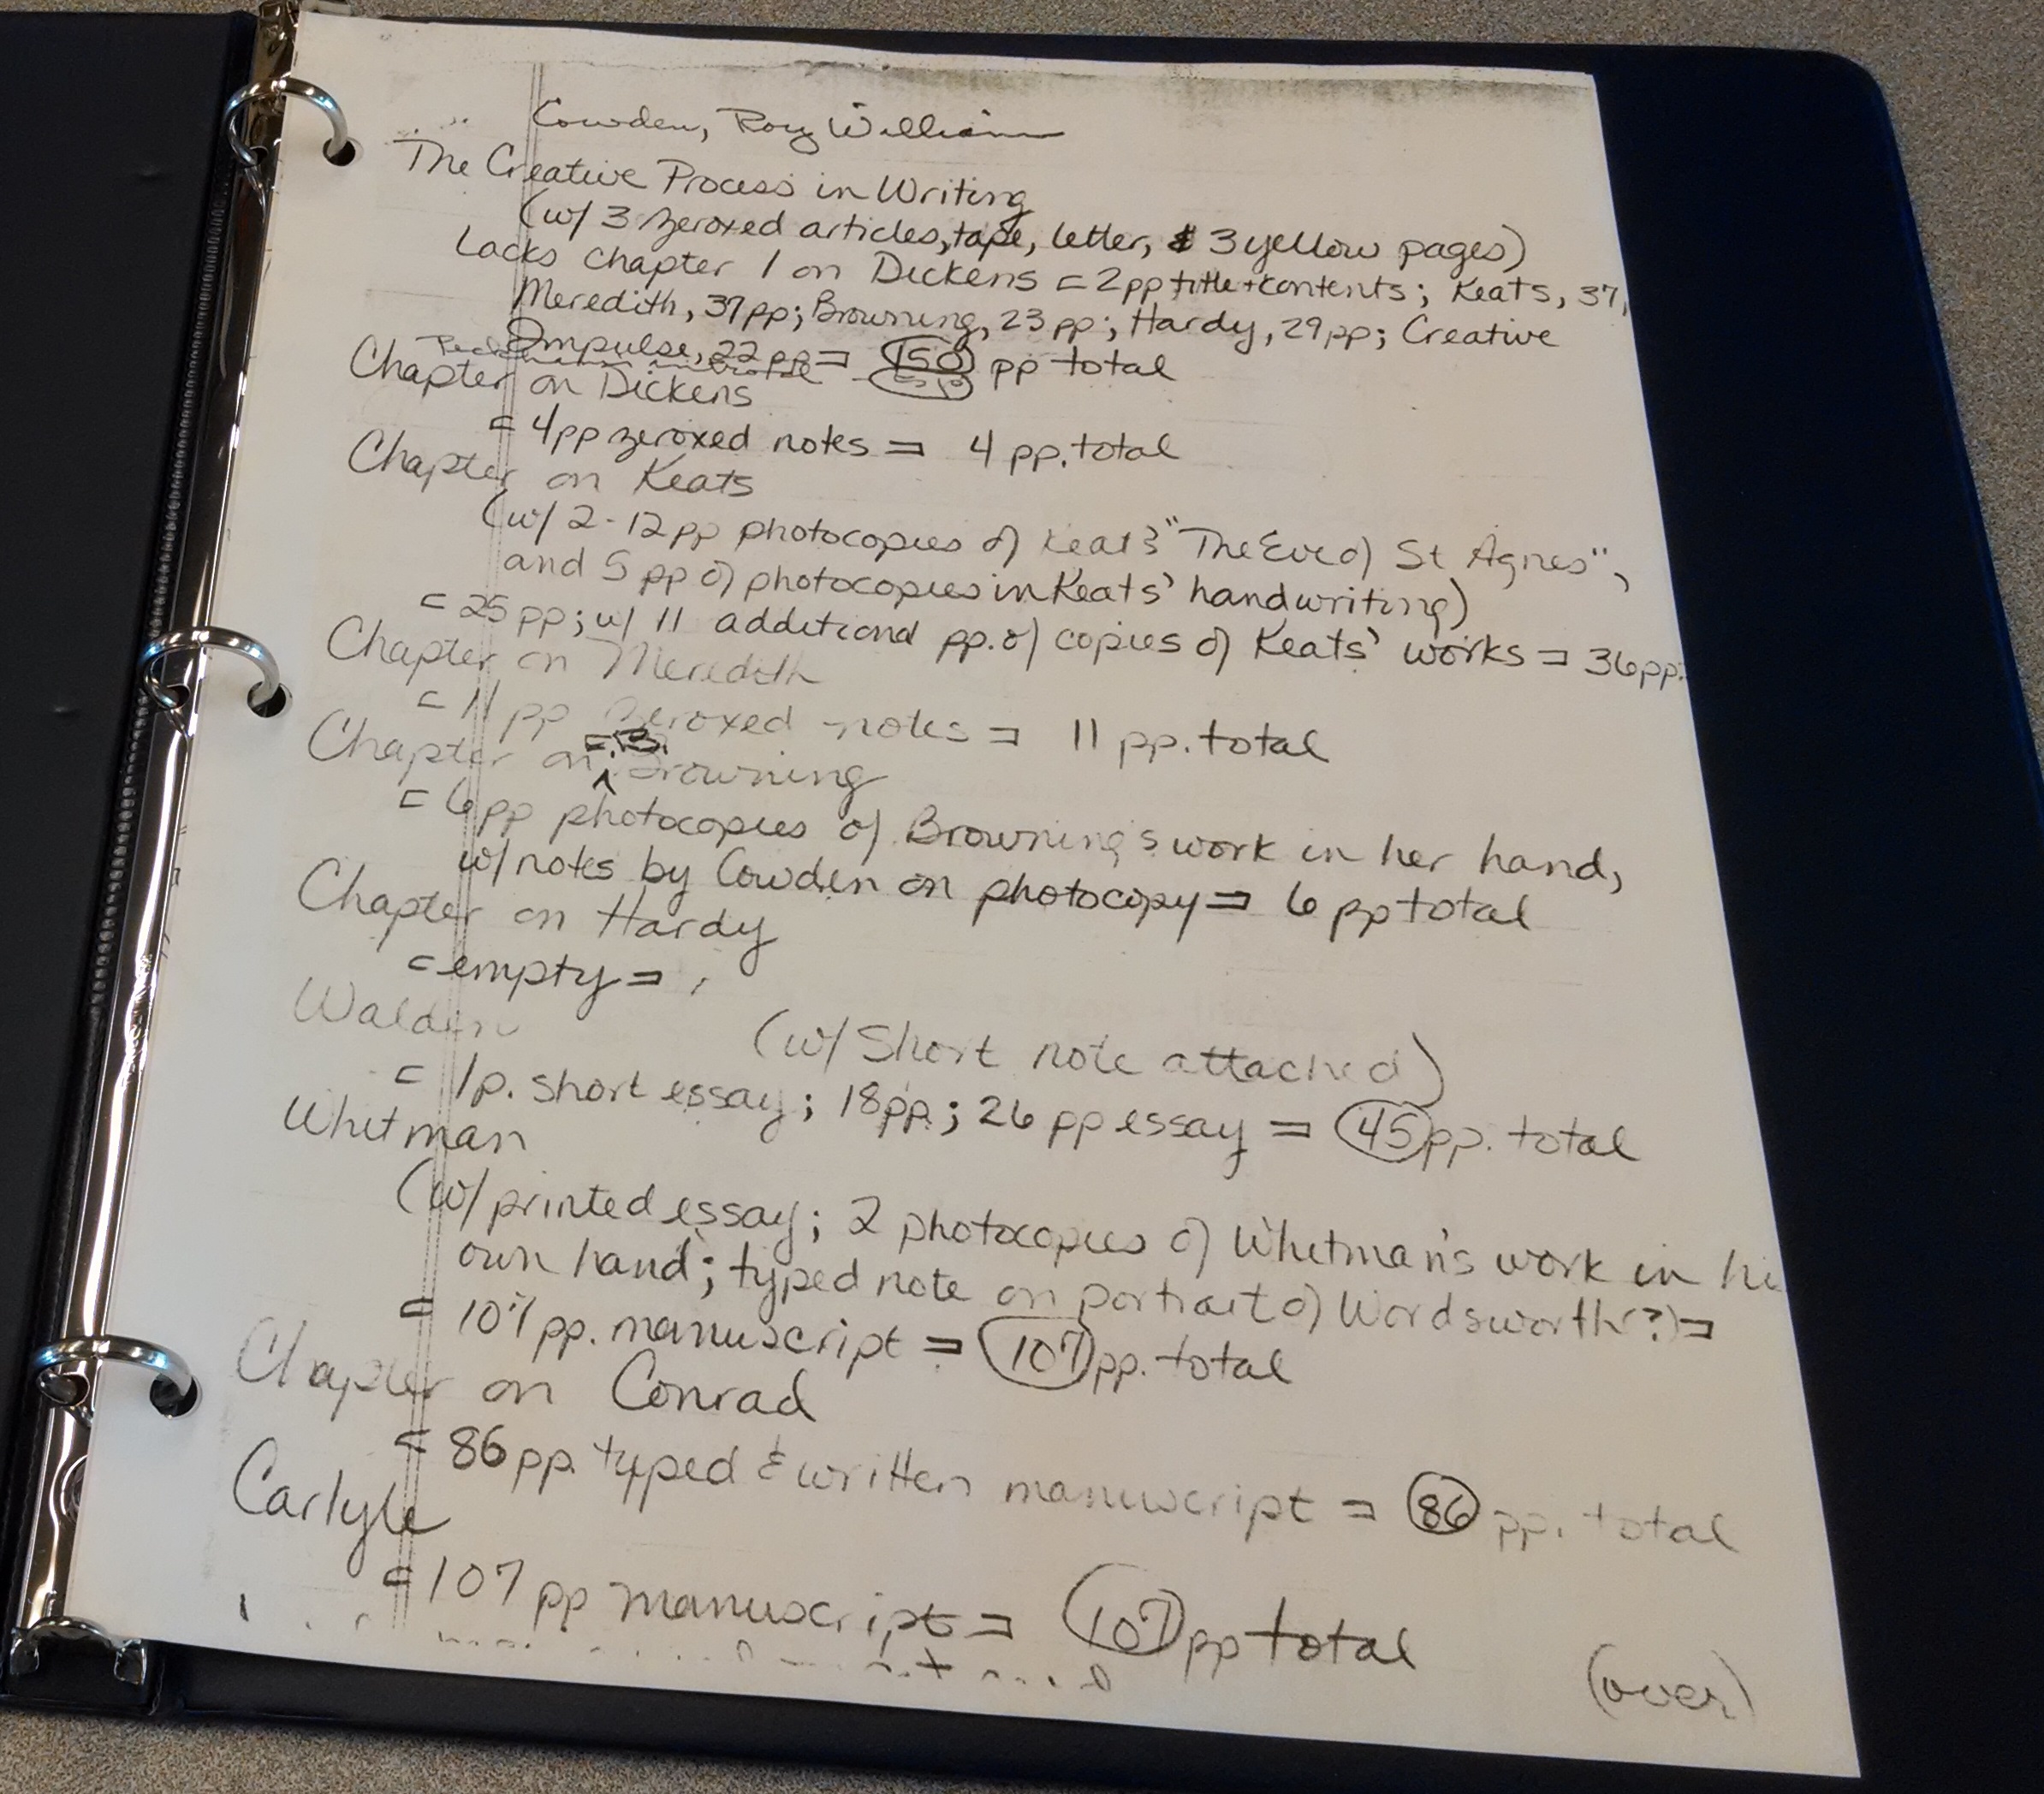 Handwritten contents of unpublished manuscript, The Creative Process of Writing, by Row W. Cowden